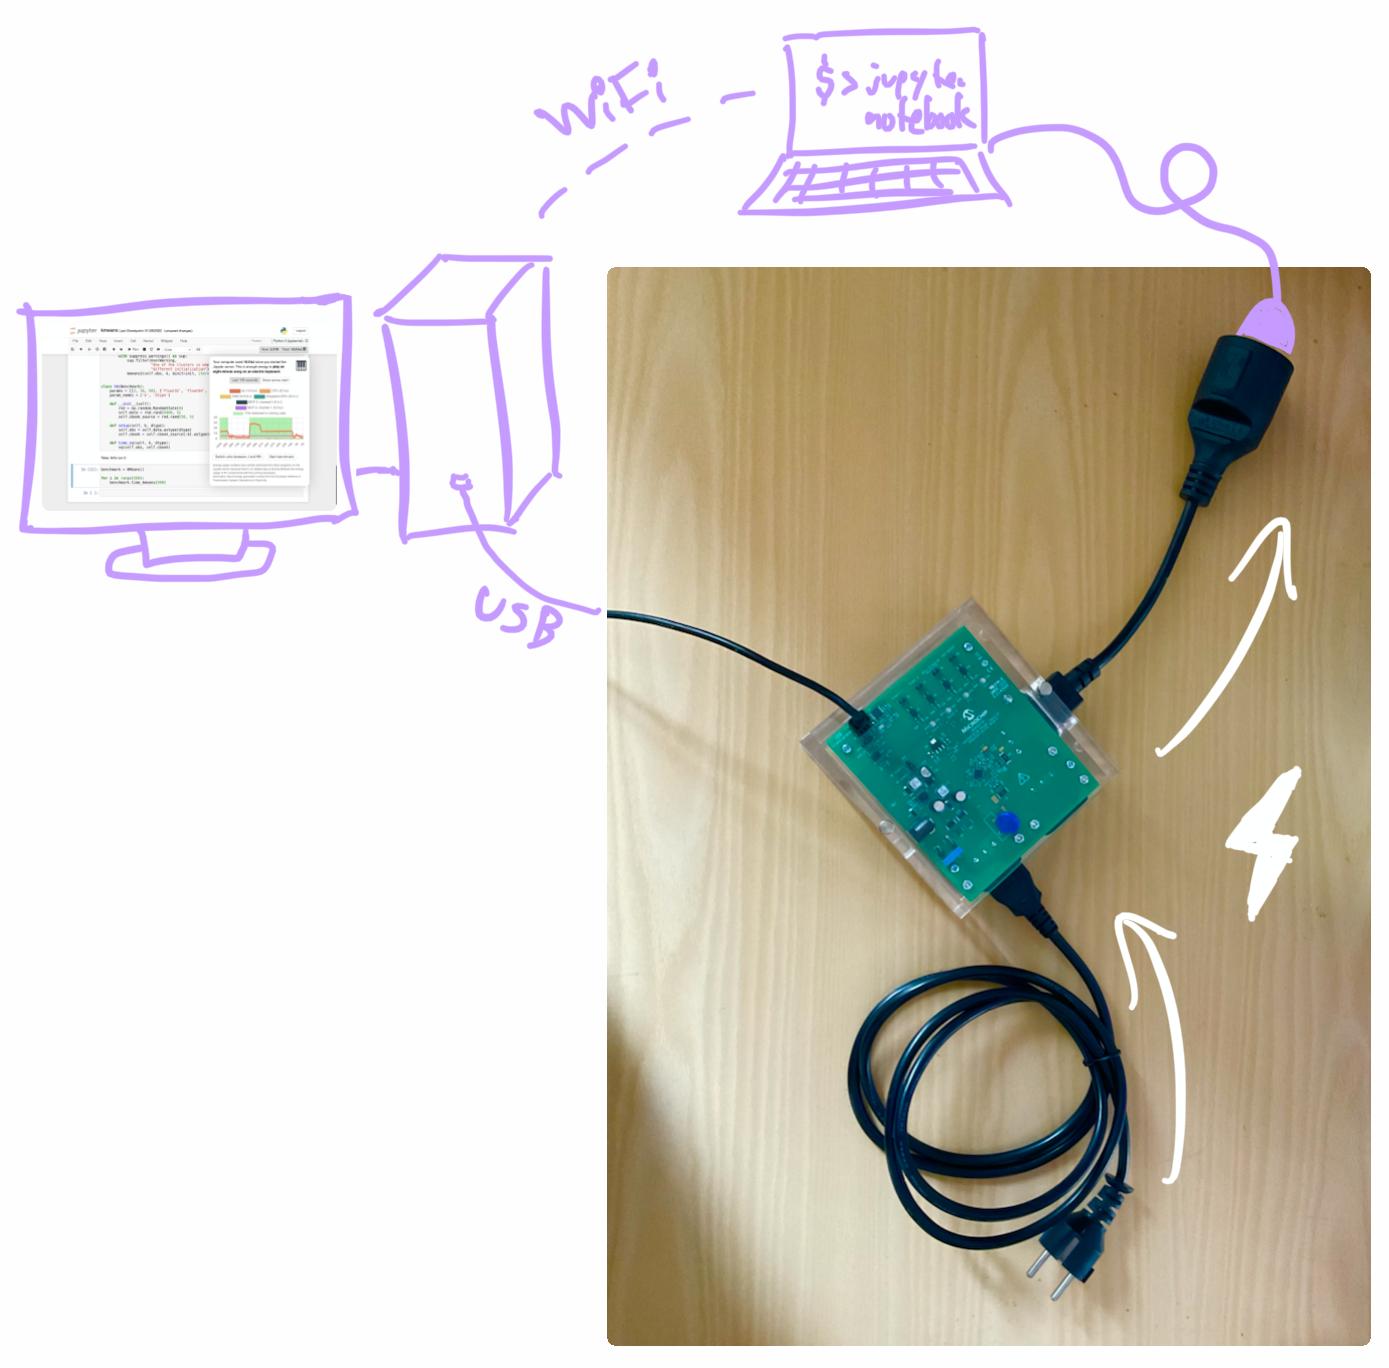 The MCP sits between the wall and the laptop. The laptop has a Juypter Notebook with the extension running and offers it publicly over wifi. Another PC has the notebook open and connects to the MCP. It can therefore relate the external energy measurements to the internal measurements.